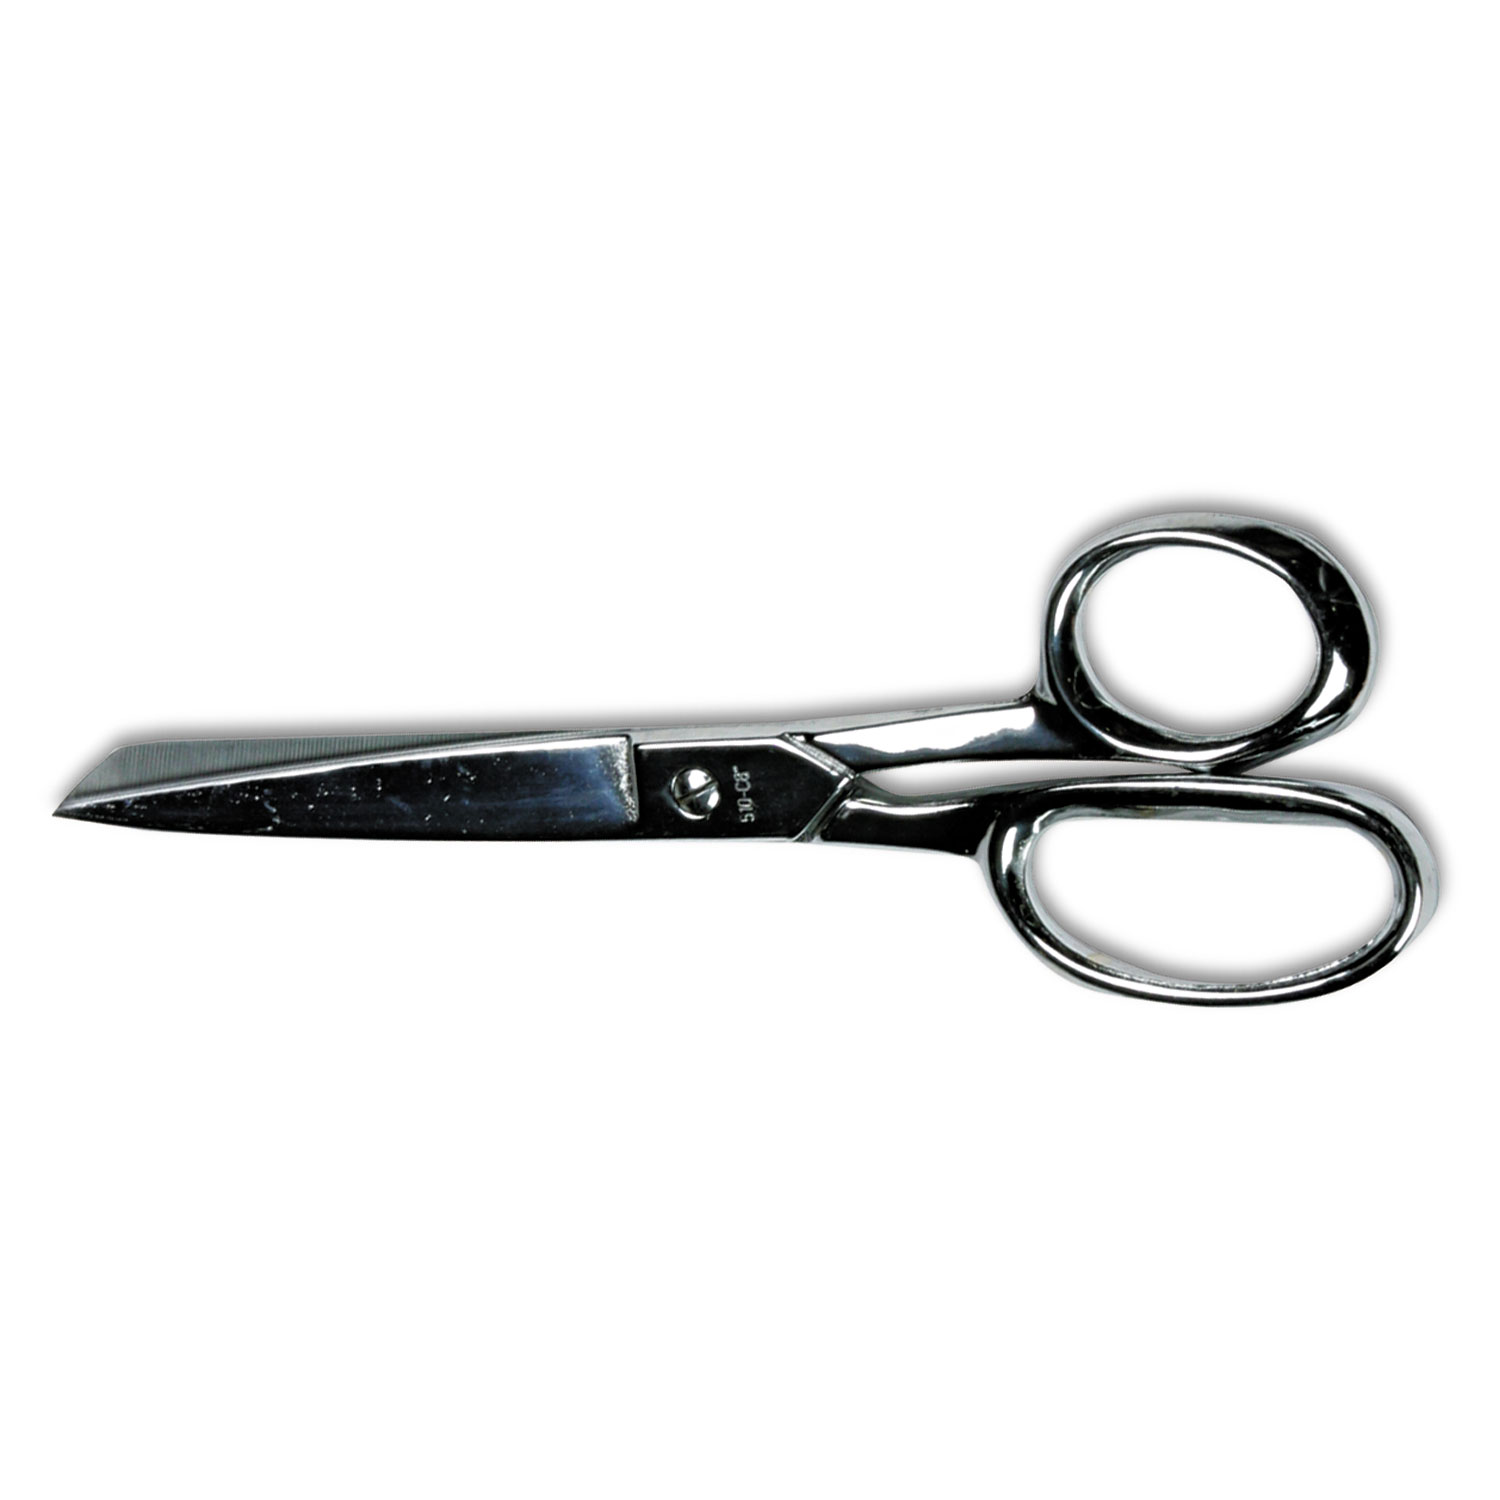  Clauss 10257 Hot Forged Carbon Steel Shears, 8 Long, 3.88 Cut Length, Nickel Straight Handle (ACM10257) 